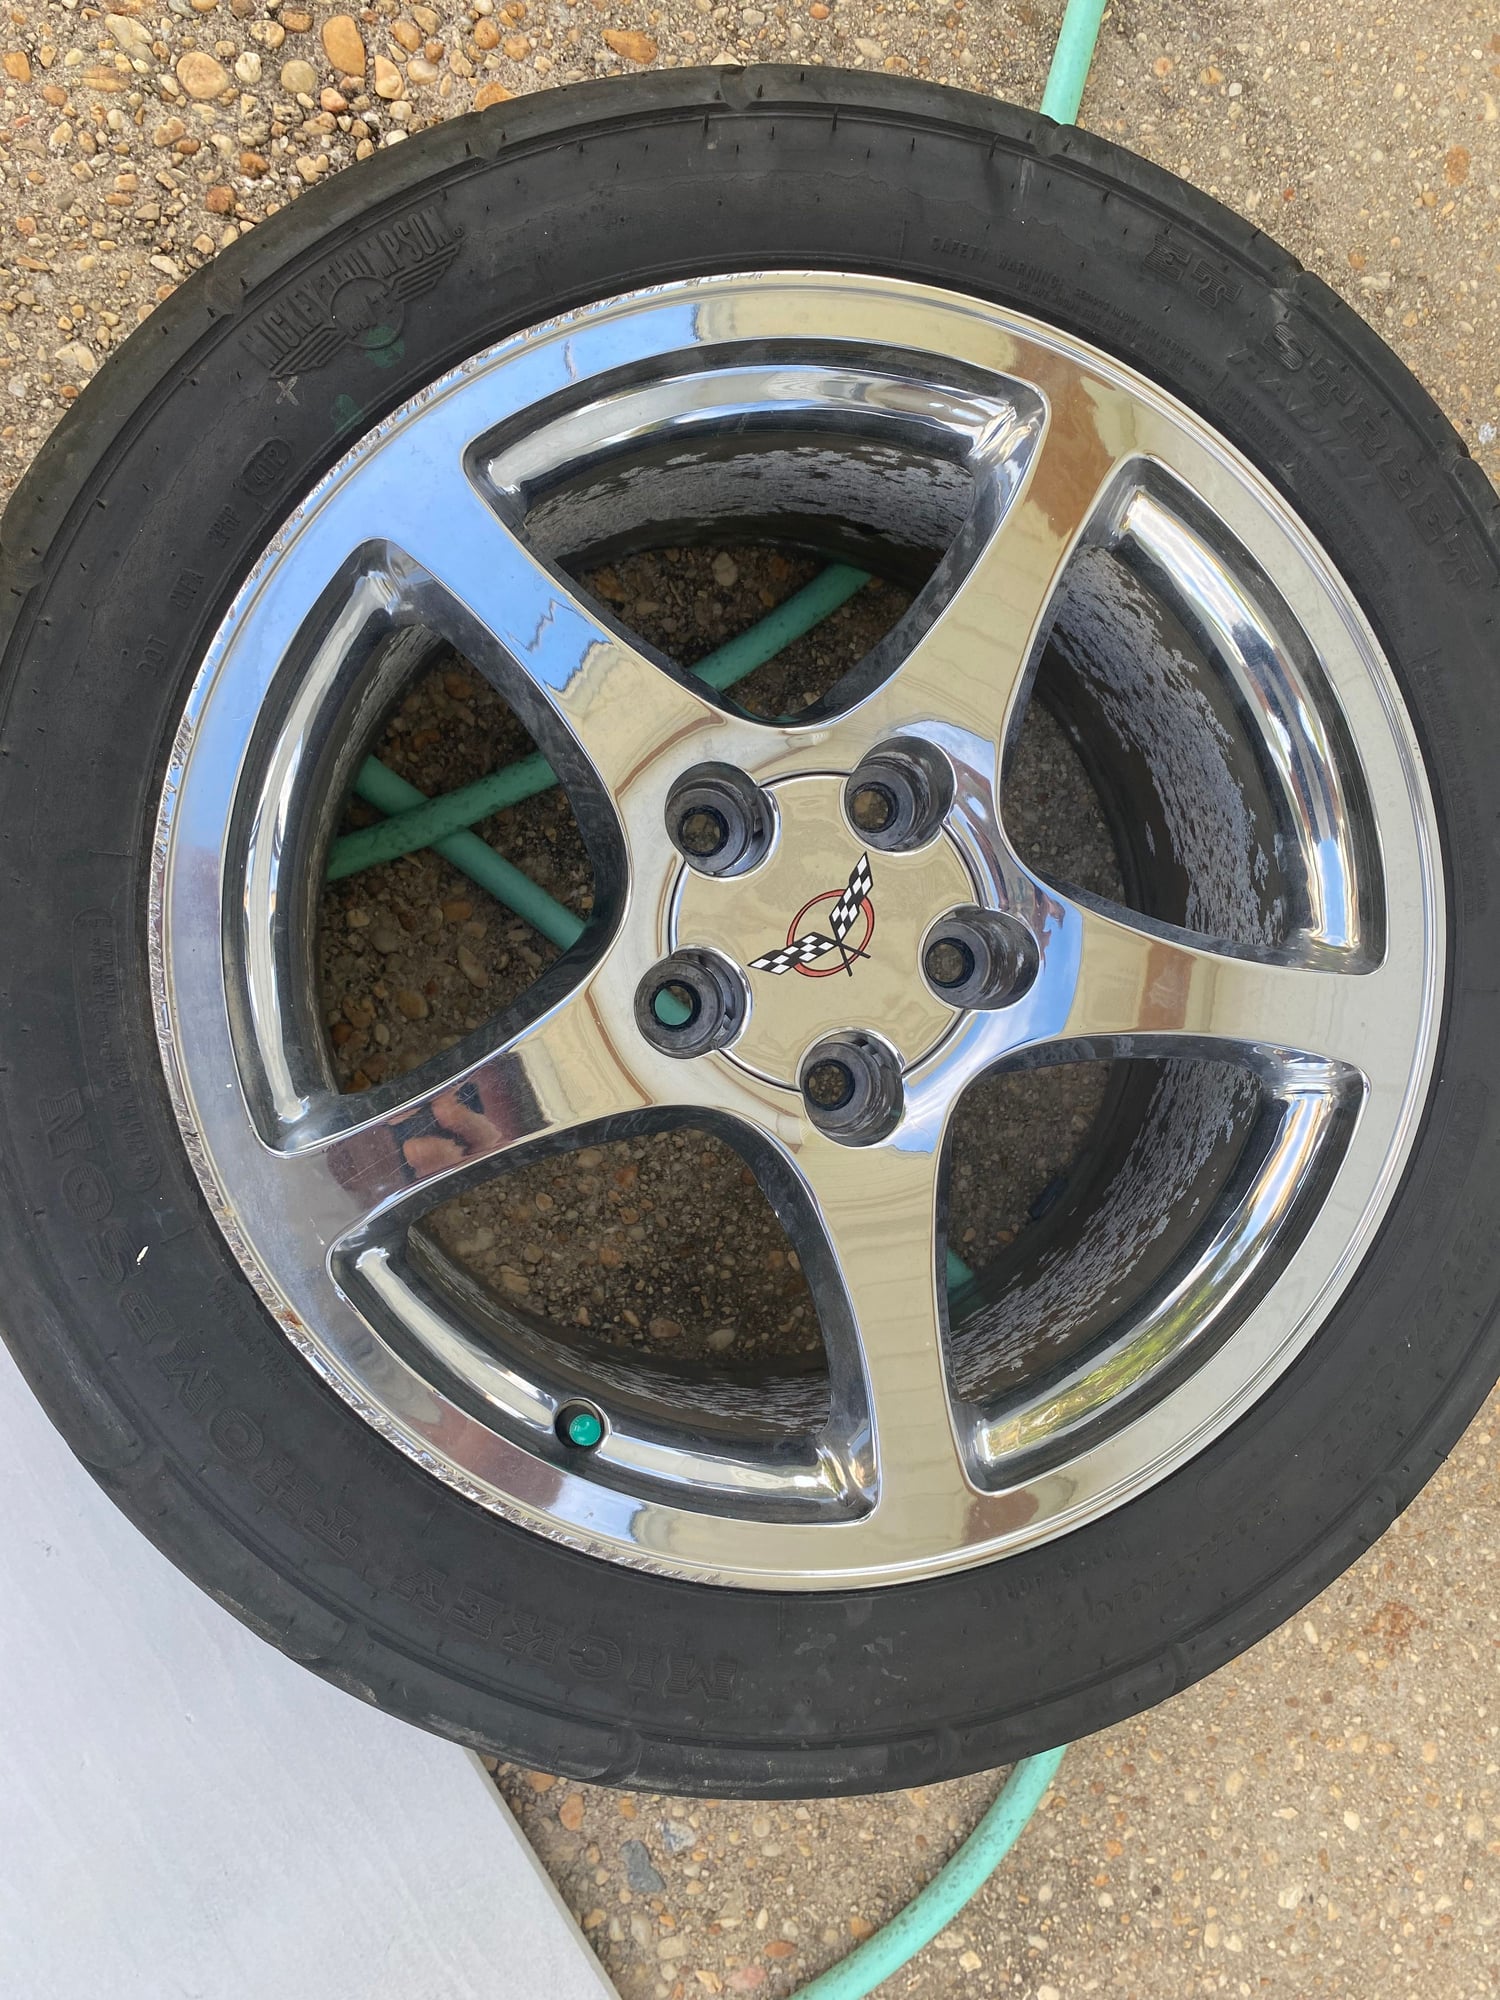 Wheels and Tires/Axles - Chrome c5 wheels and tires - Used - 1993 to 2002 Chevrolet Camaro - Perdido, AL 36562, United States